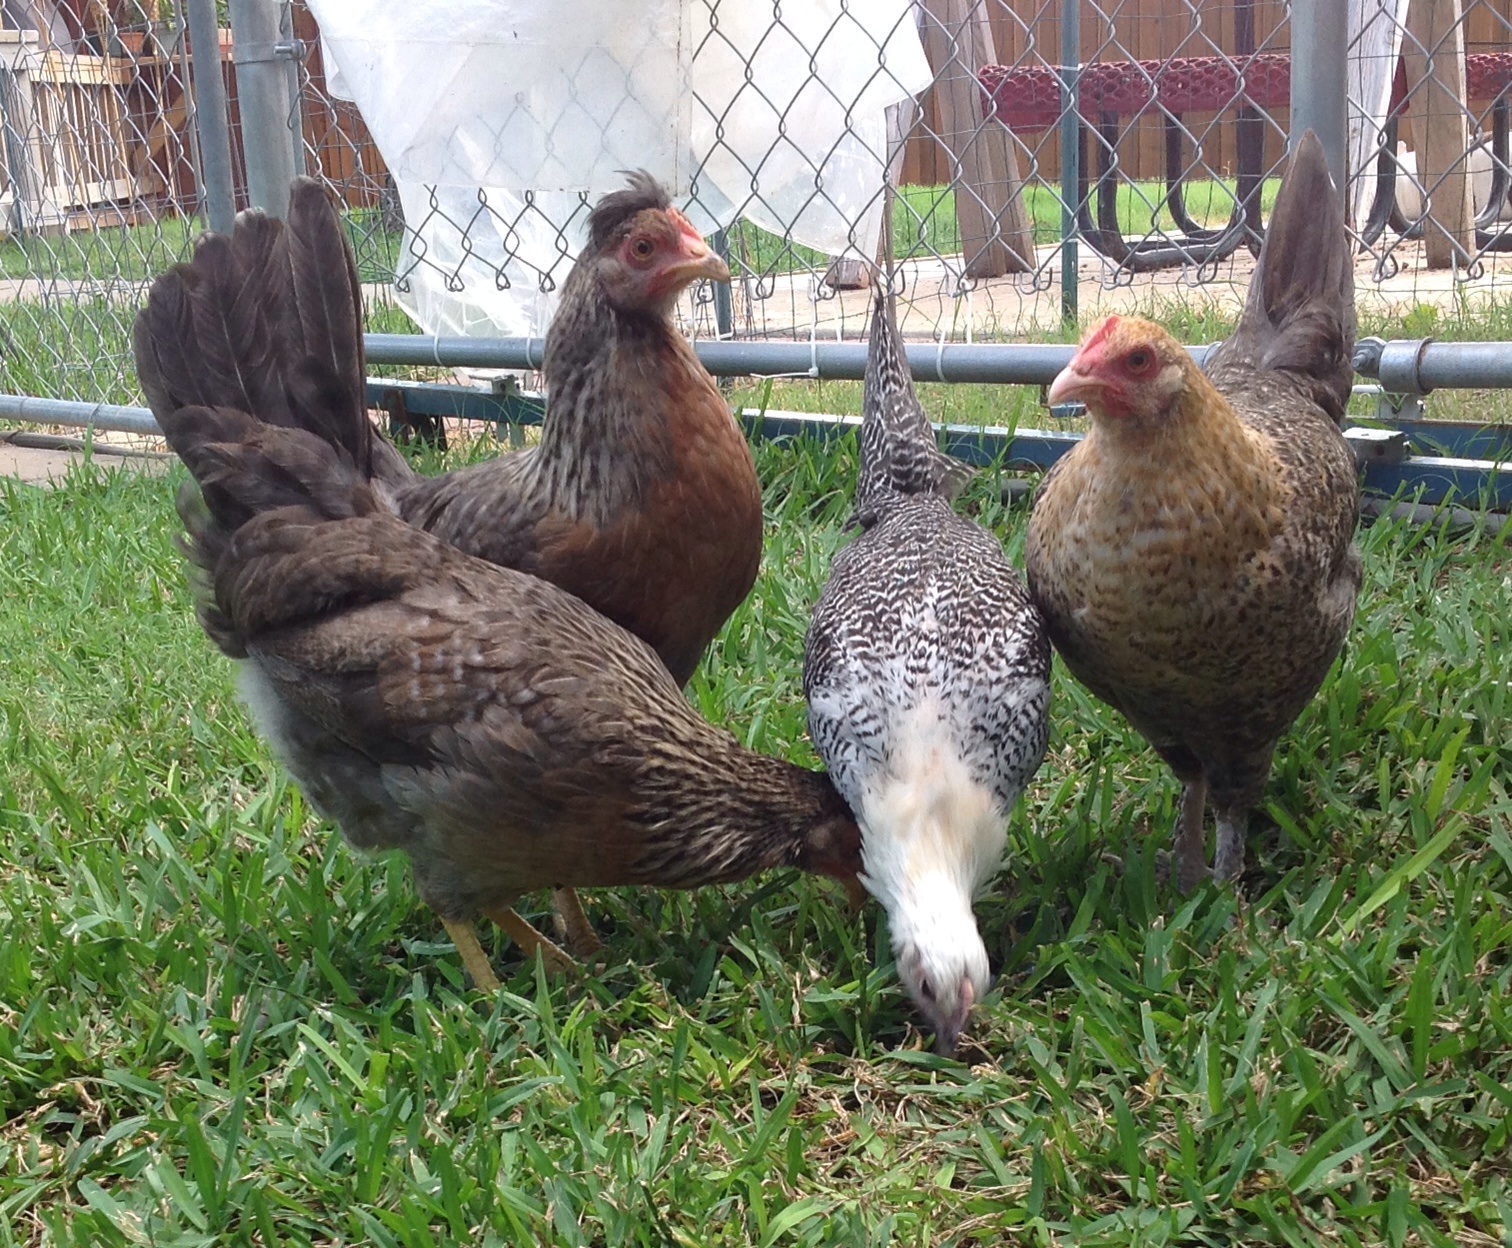 These little ladies are growing up. The cream leg bars are the friendliest chicks.